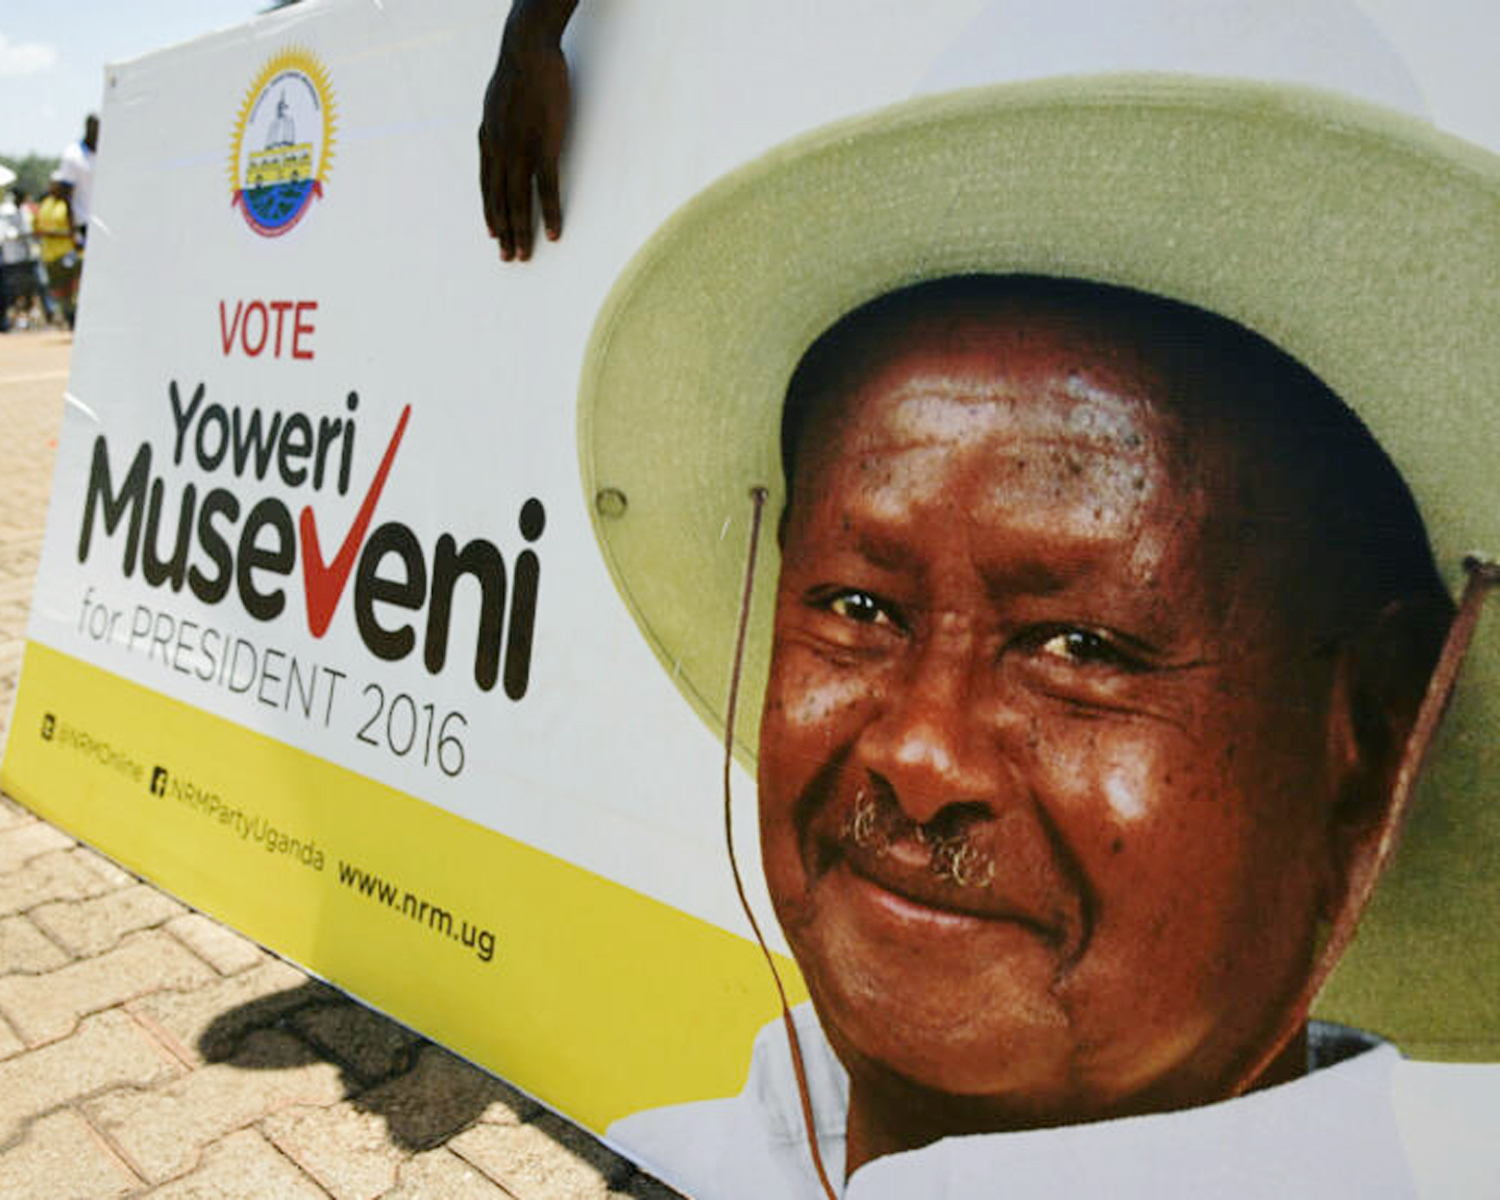 Who is letting down President Museveni?